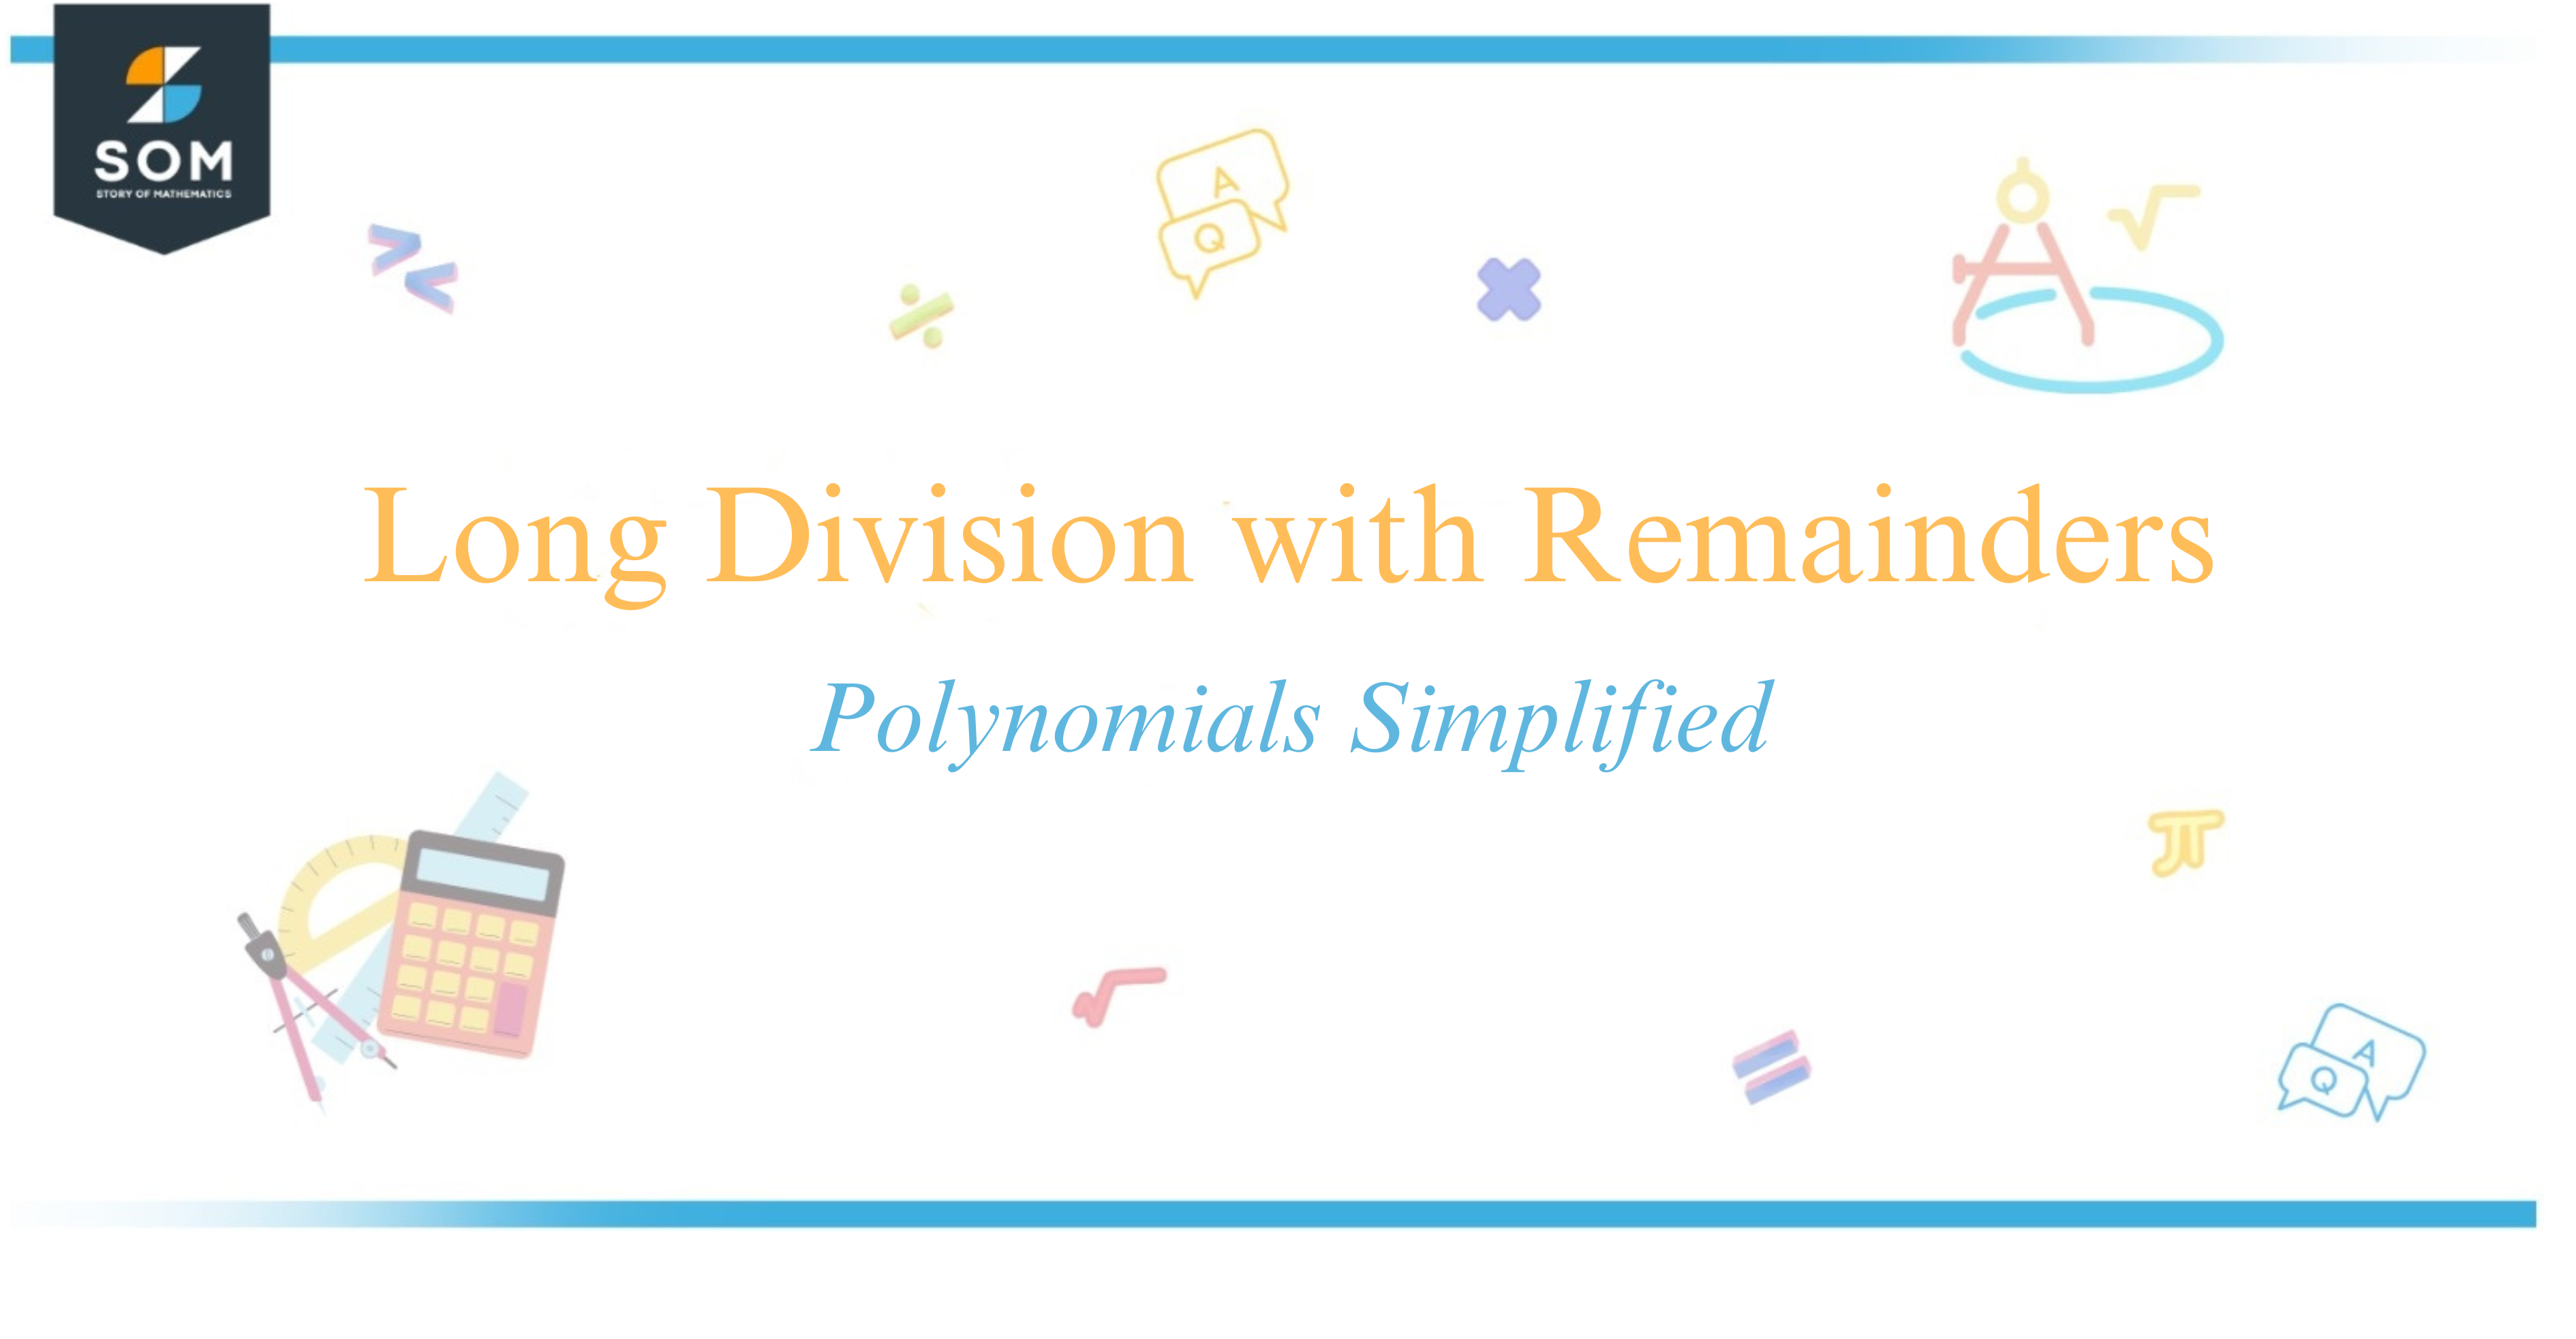 Long Division with Remainders Polynomials Simplified